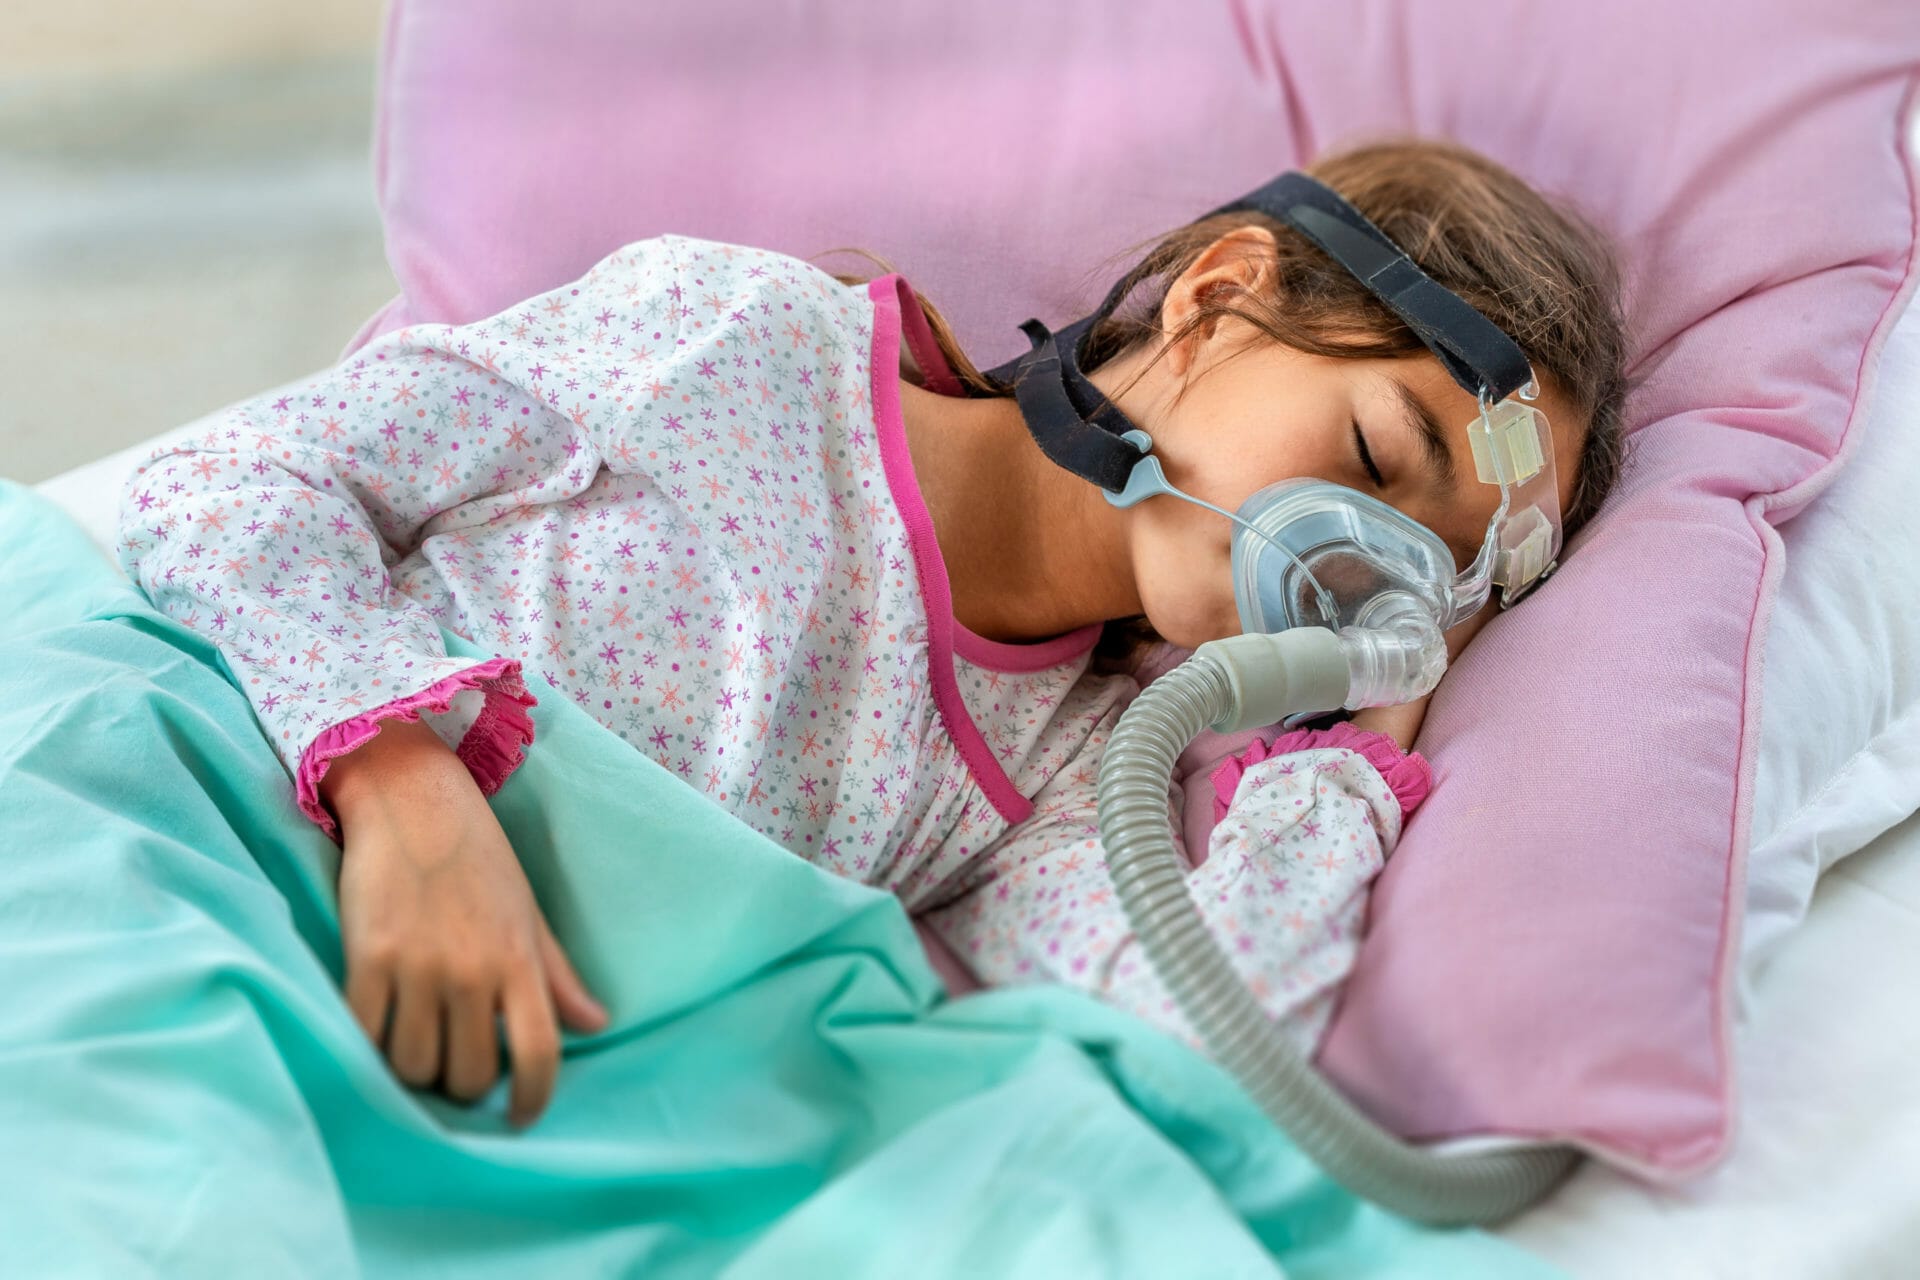 Child suffering from sleep apnoea using a machine to assist with breathing